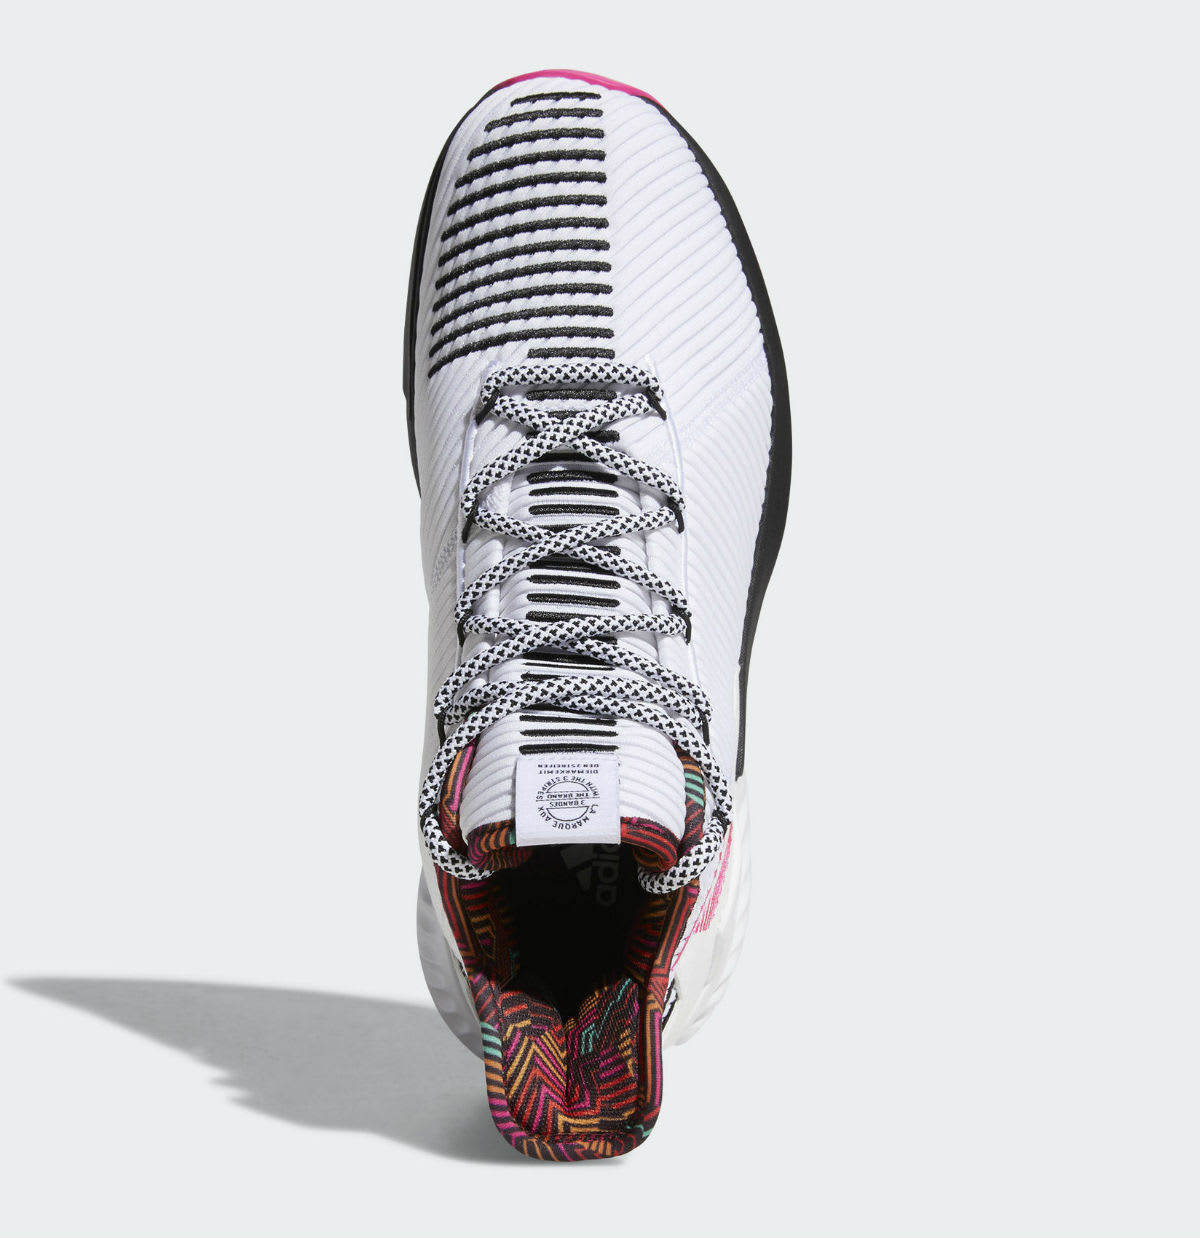 Adidas D Rose 9 White Black Pink Release Date BB7658 Top